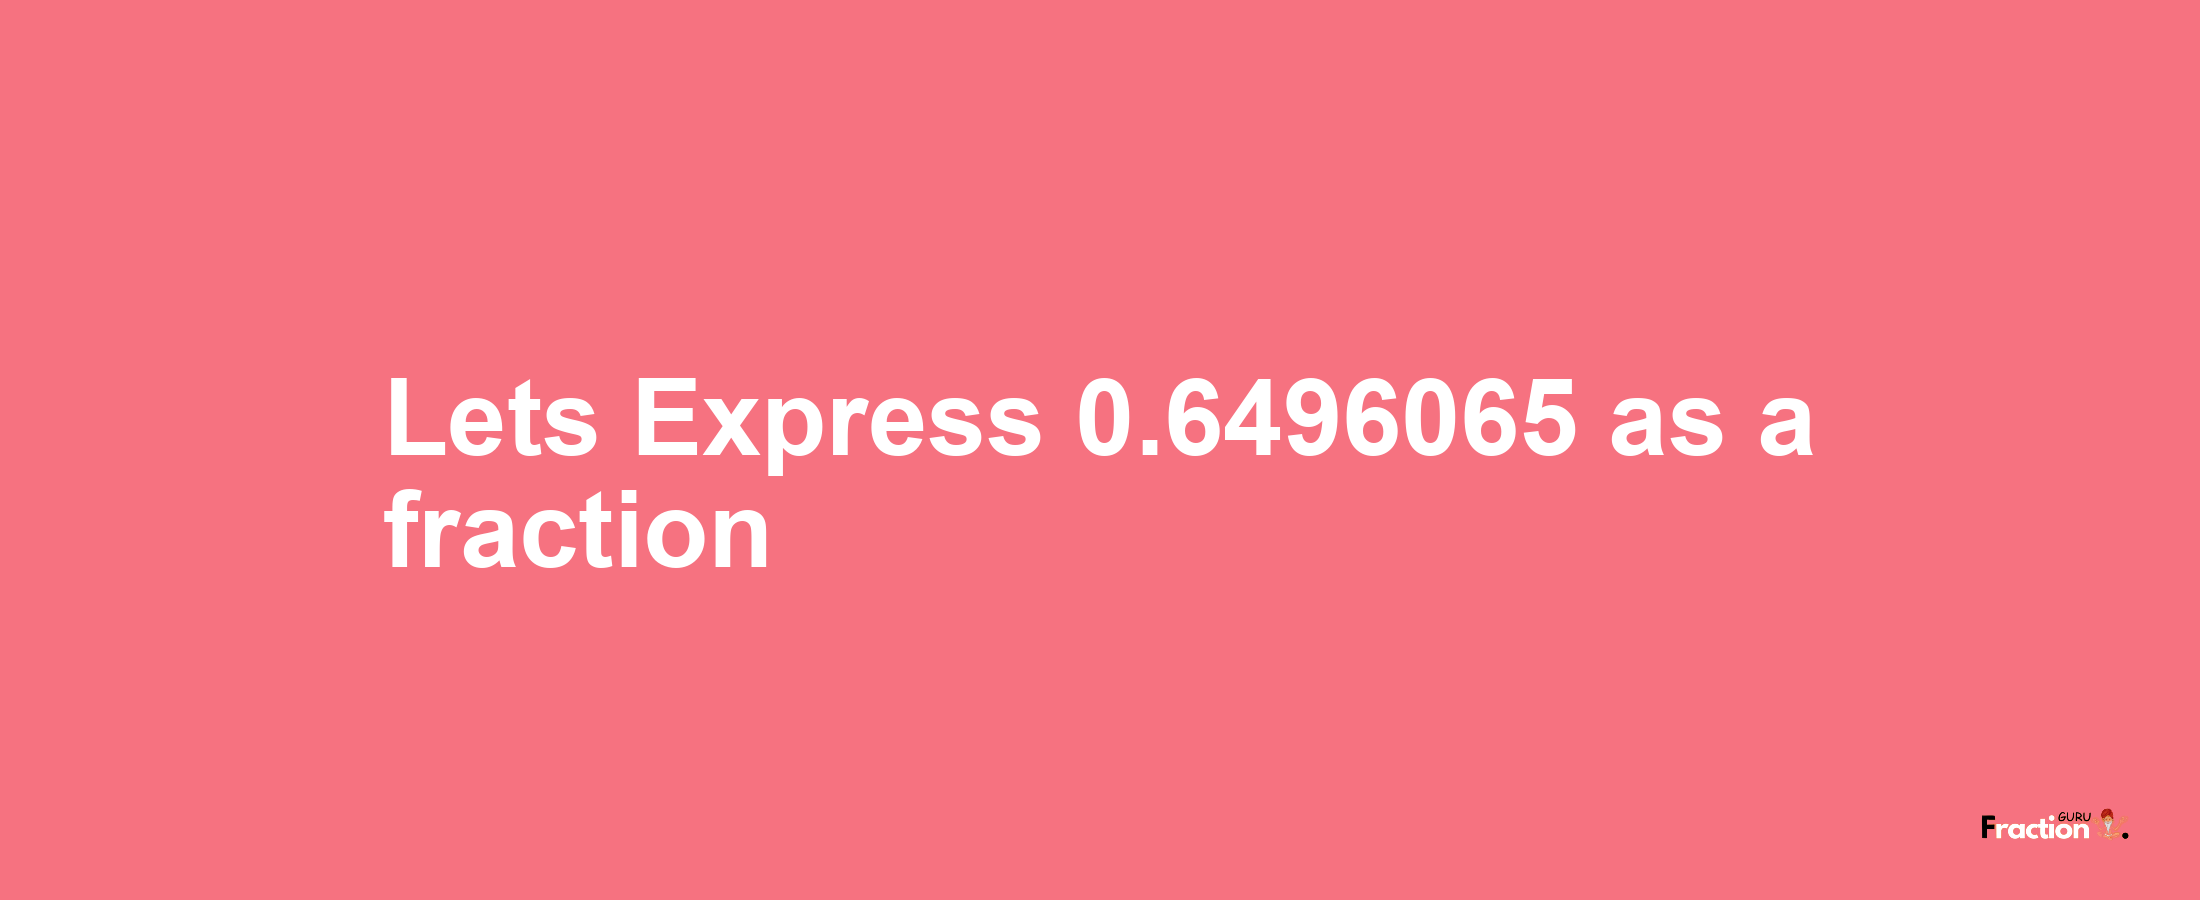 Lets Express 0.6496065 as afraction